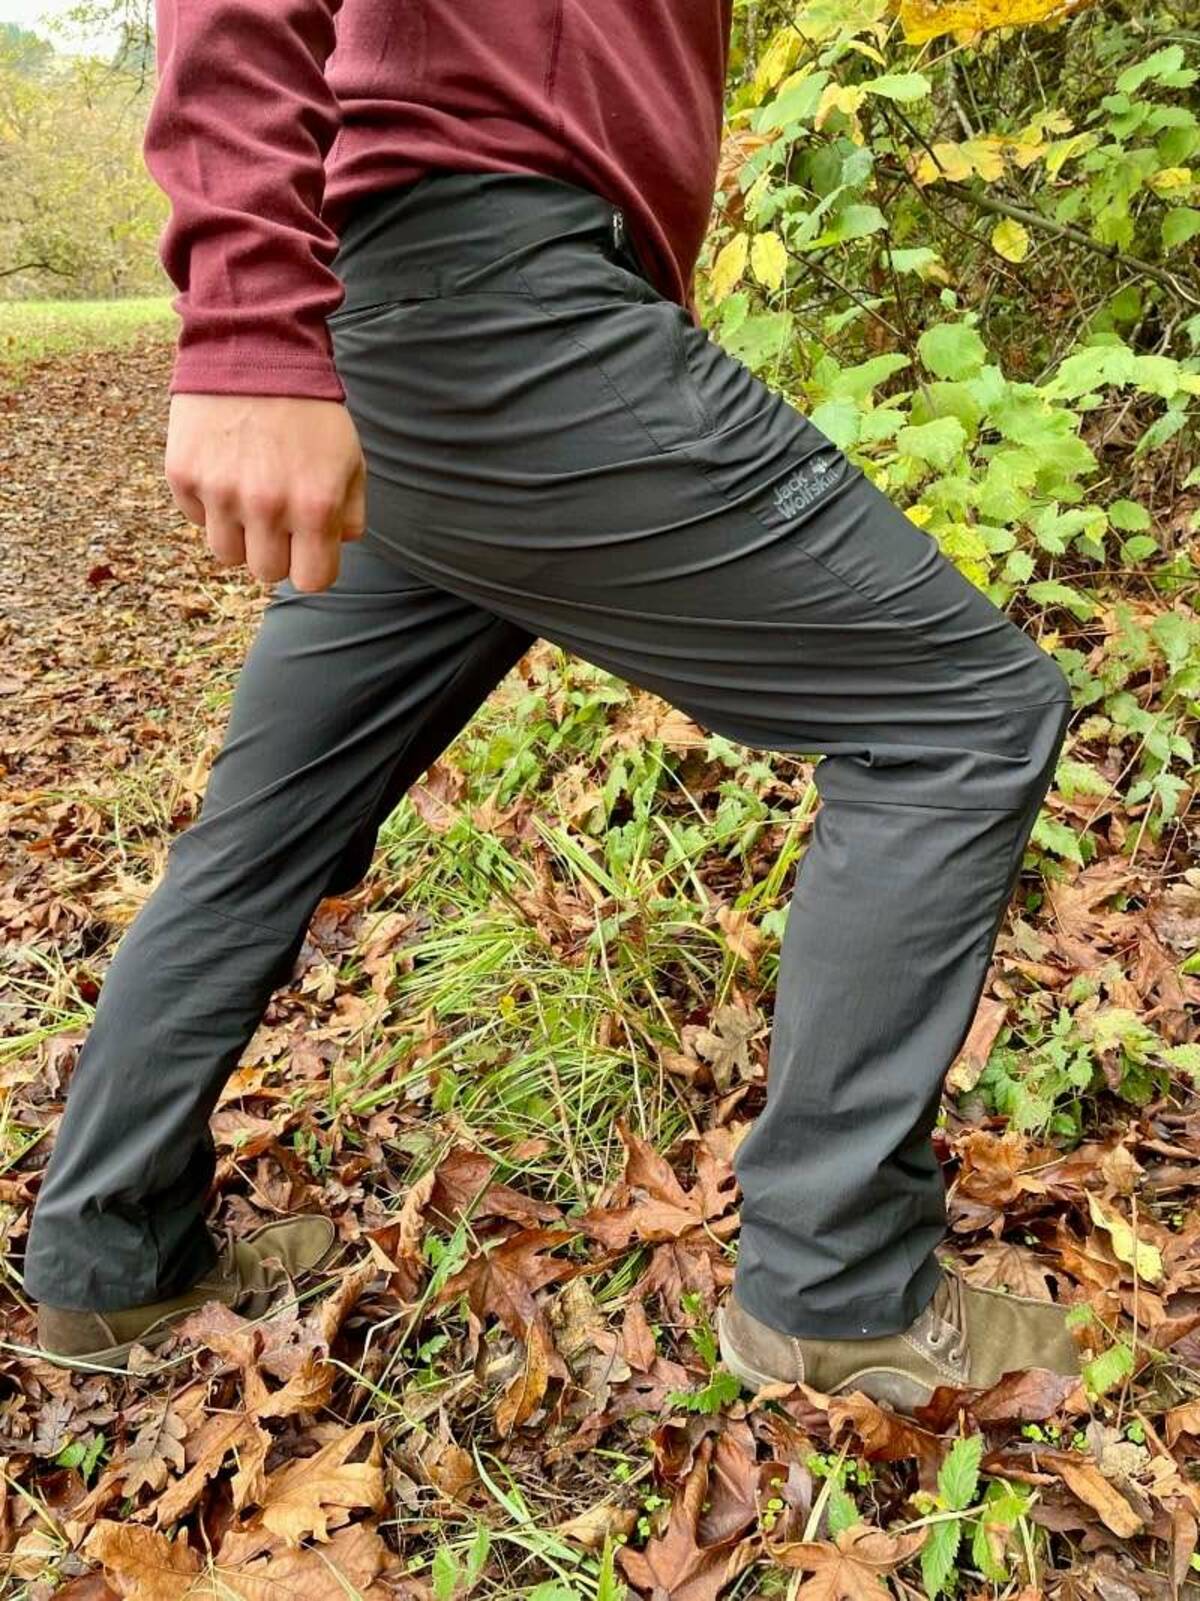 Jack Wolfskin Activate Thermic Pants Review 2023 – Climbing Gear Reviews